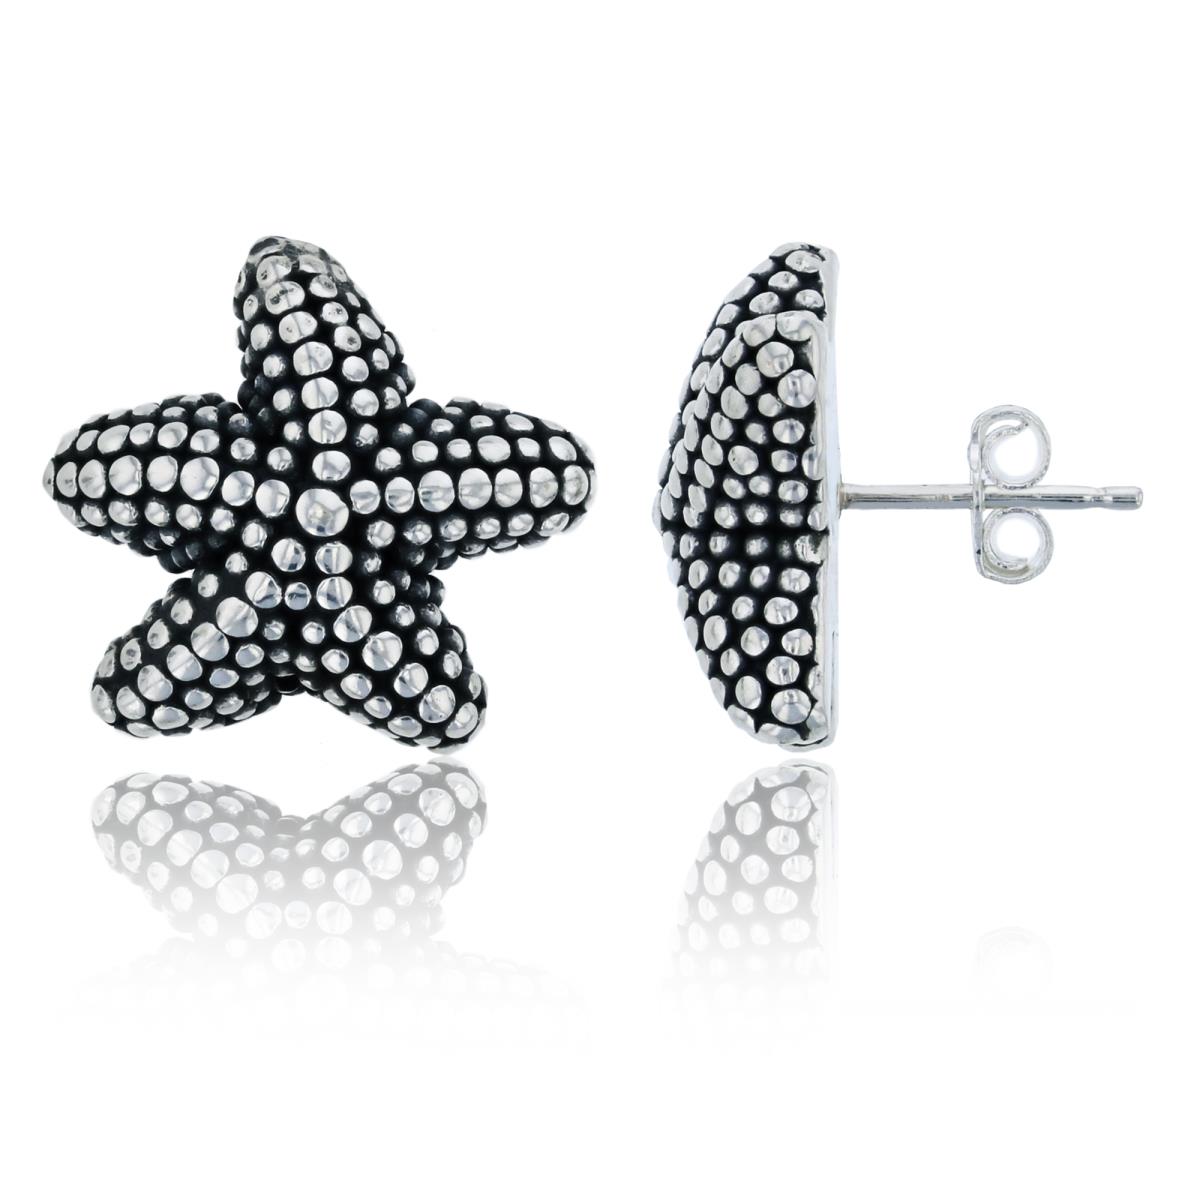 Sterling Silver Oxidized Electroformed Bubble Starfish Stud Earring